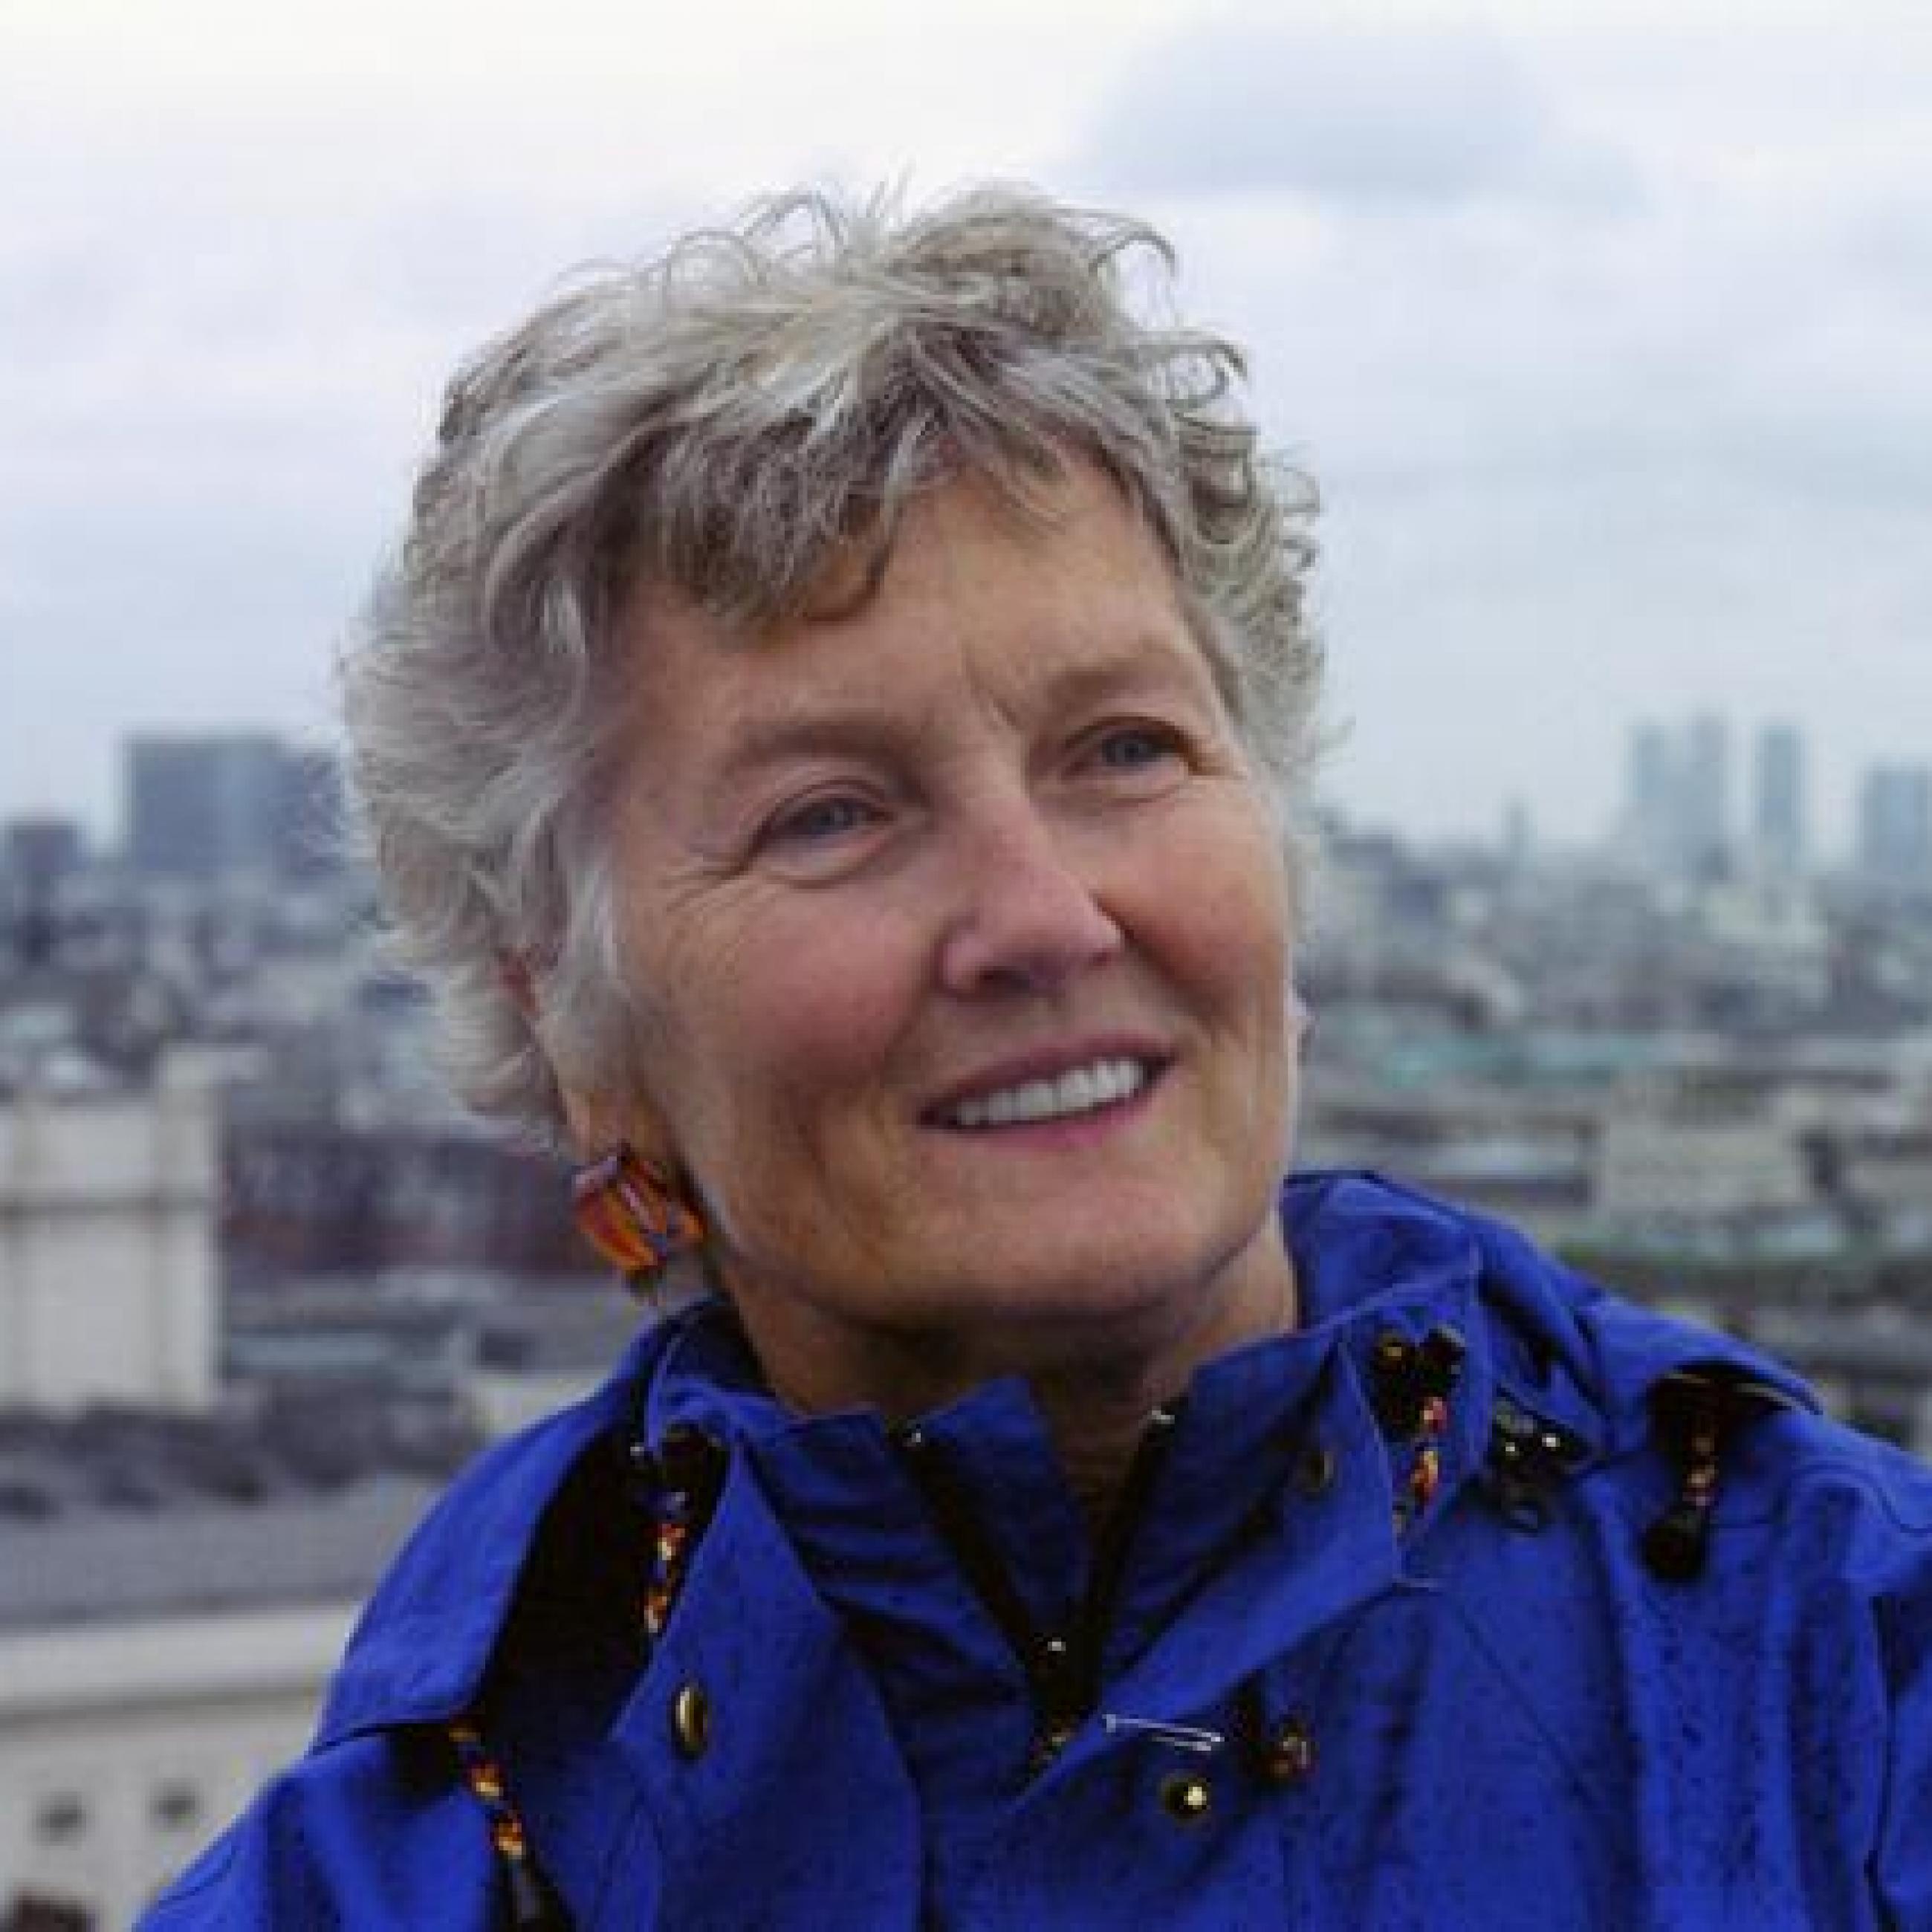 Peggy Seeger smiling with the skyline of Manchester, England in the background.